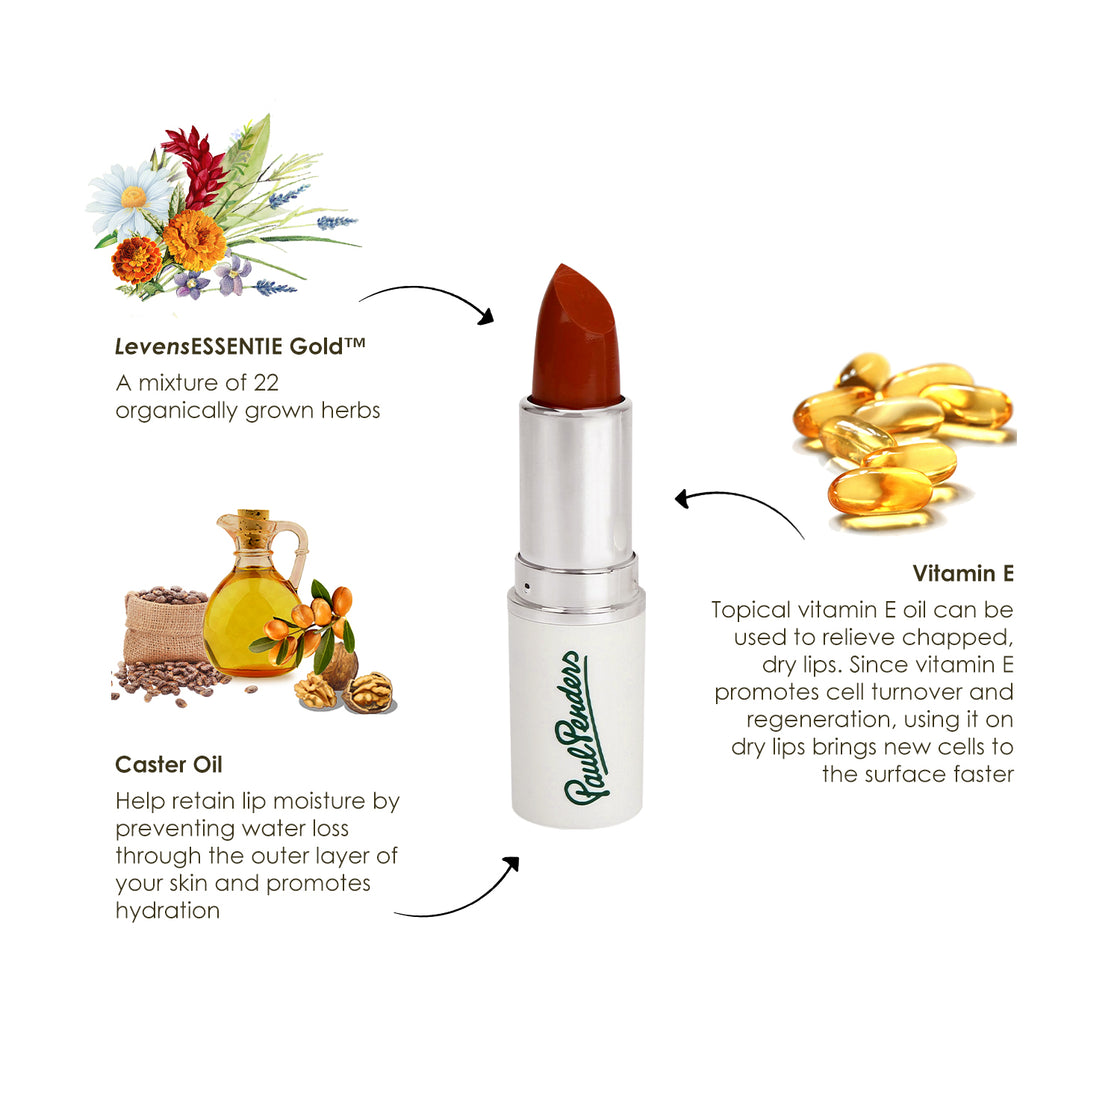 Paul Penders Hand Made Natural Cream Lipstick For A Natural Look | Moisture Rich Colour